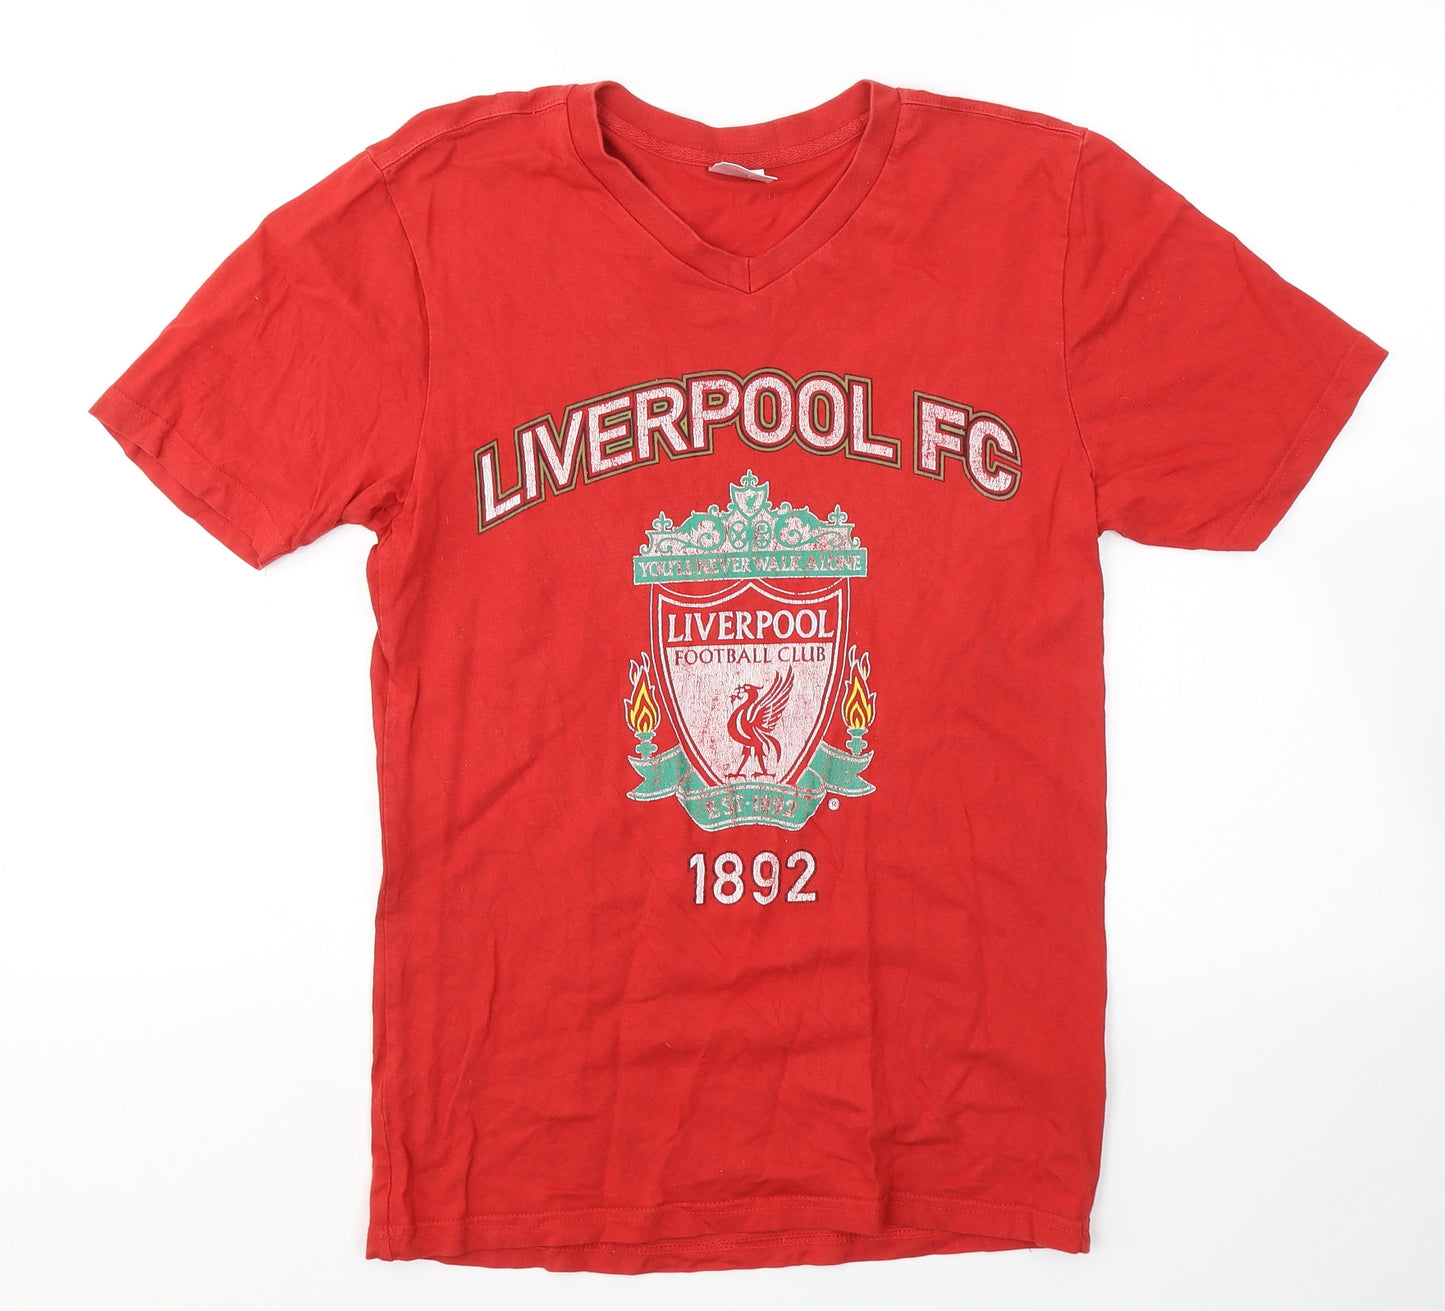 Liverpool FC Mens Red  Cotton  T-Shirt Size S V-Neck  - 1892